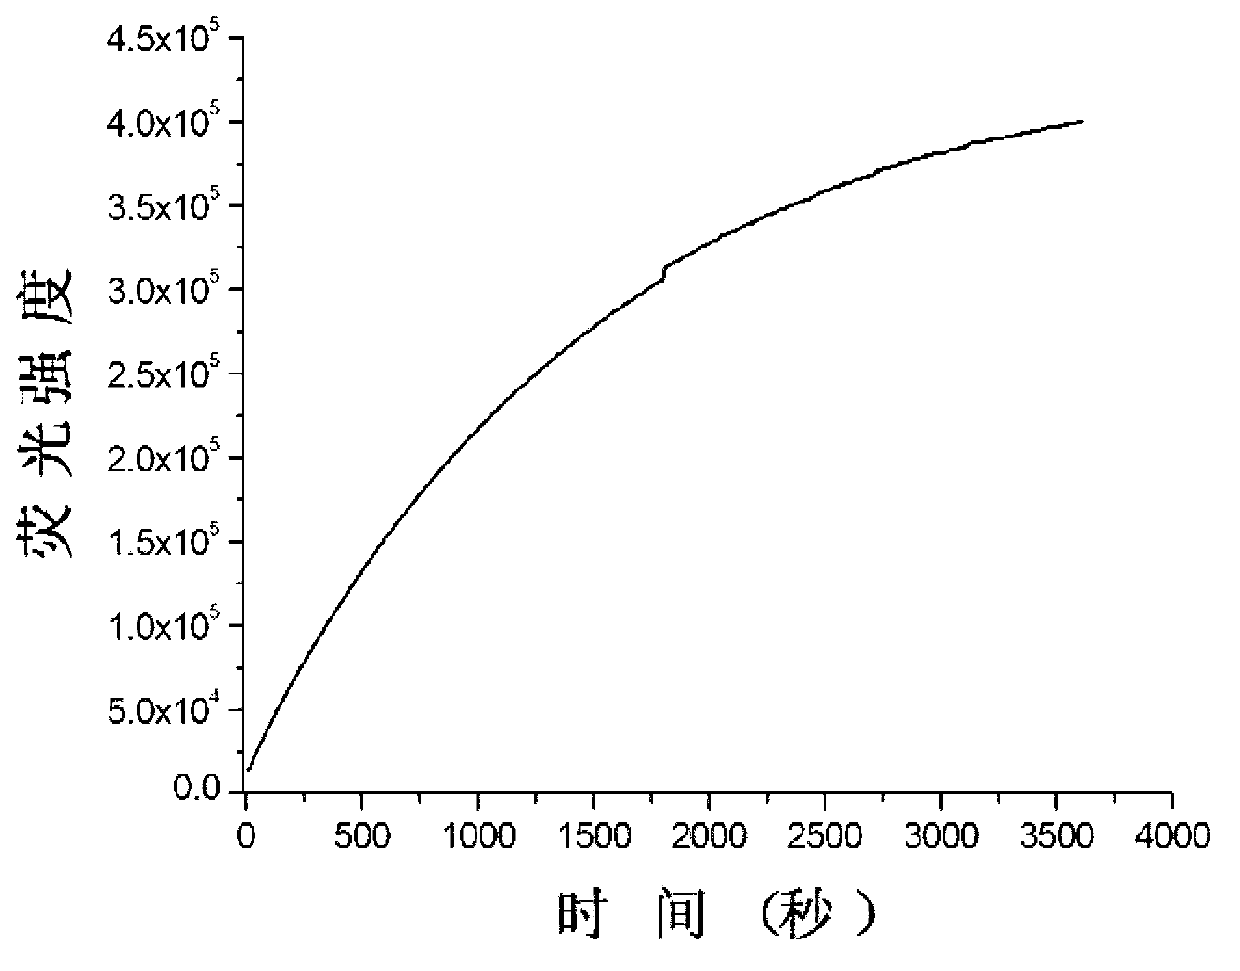 Biological thiol fluorescent probe as well as preparation method and application thereof